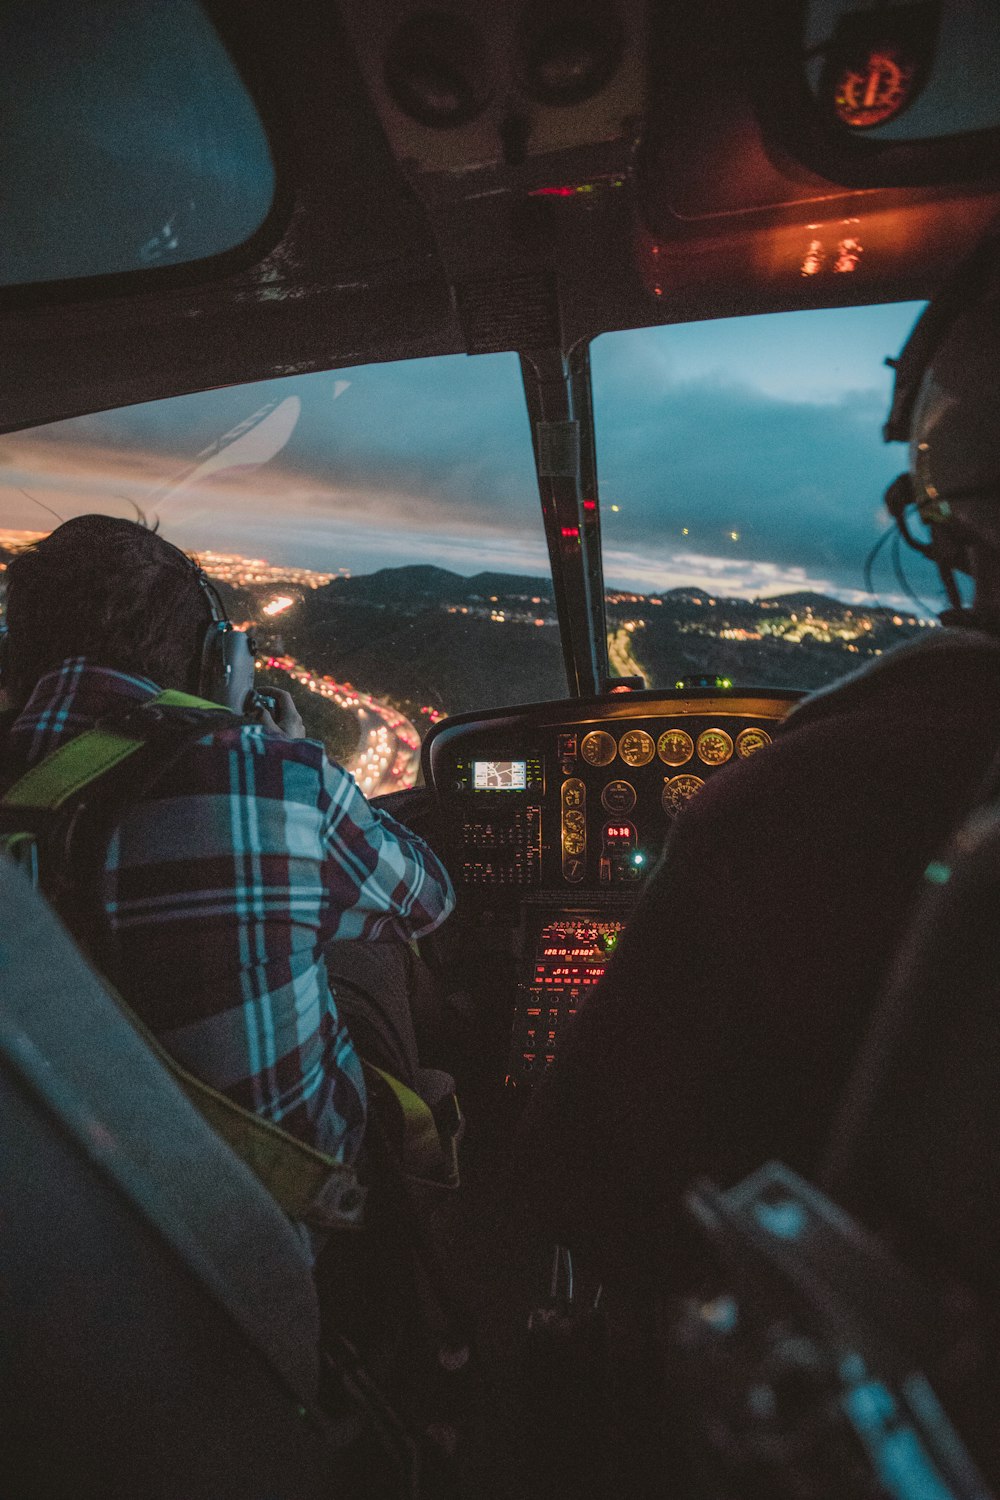 photography of man riding helicopter during nighttime